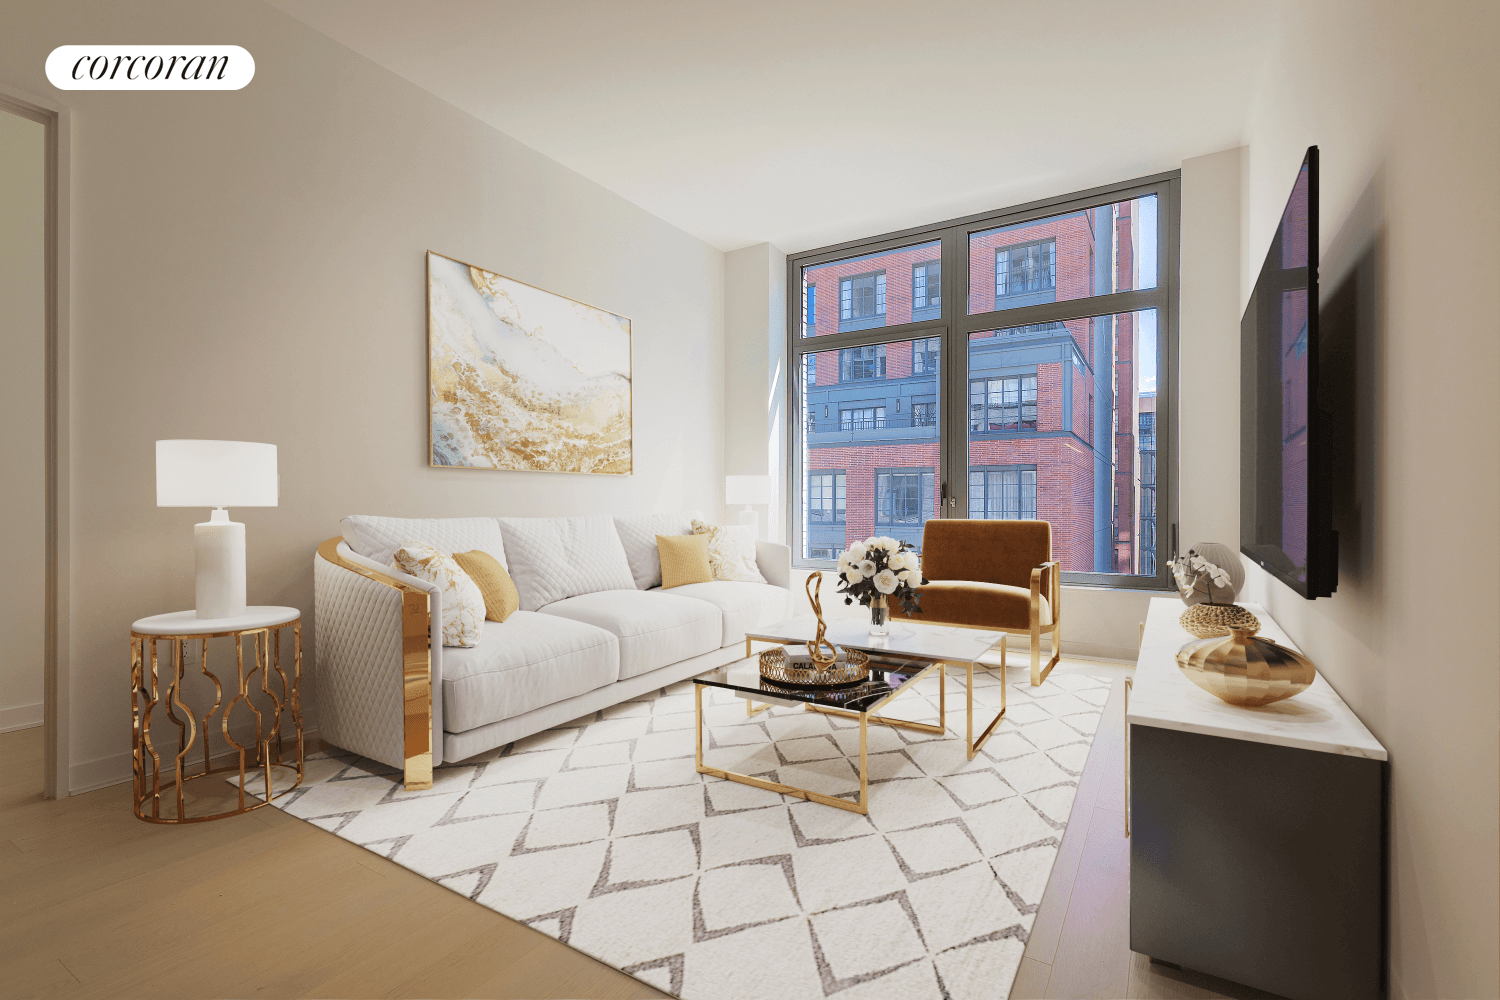 Waking up in the morning, warm Sunlight through the oversized windows brightens up this beautiful home, and brings you warmth and energy to start your new day.